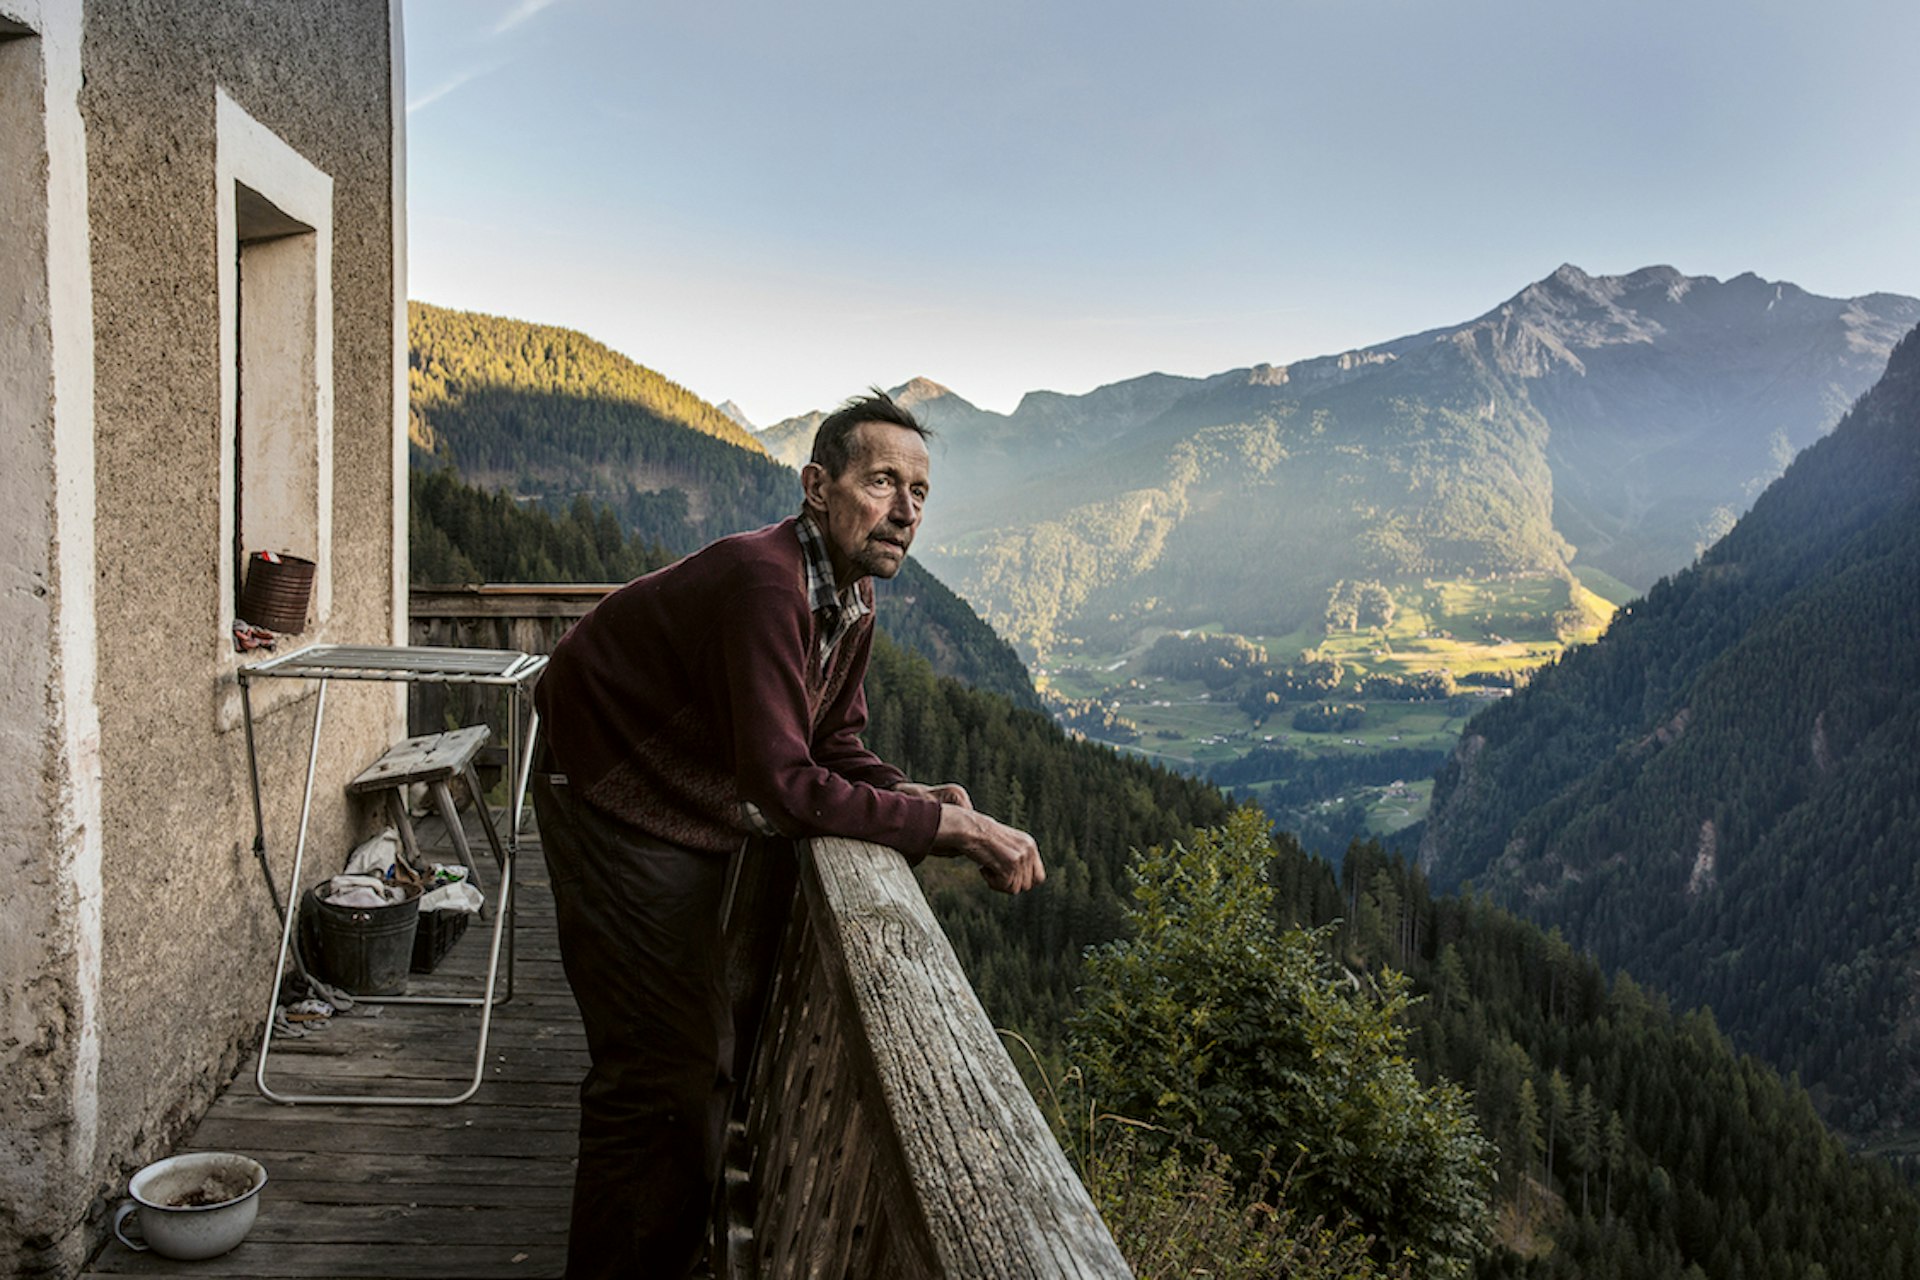 The disappearing world of mountain farmers in the Alps